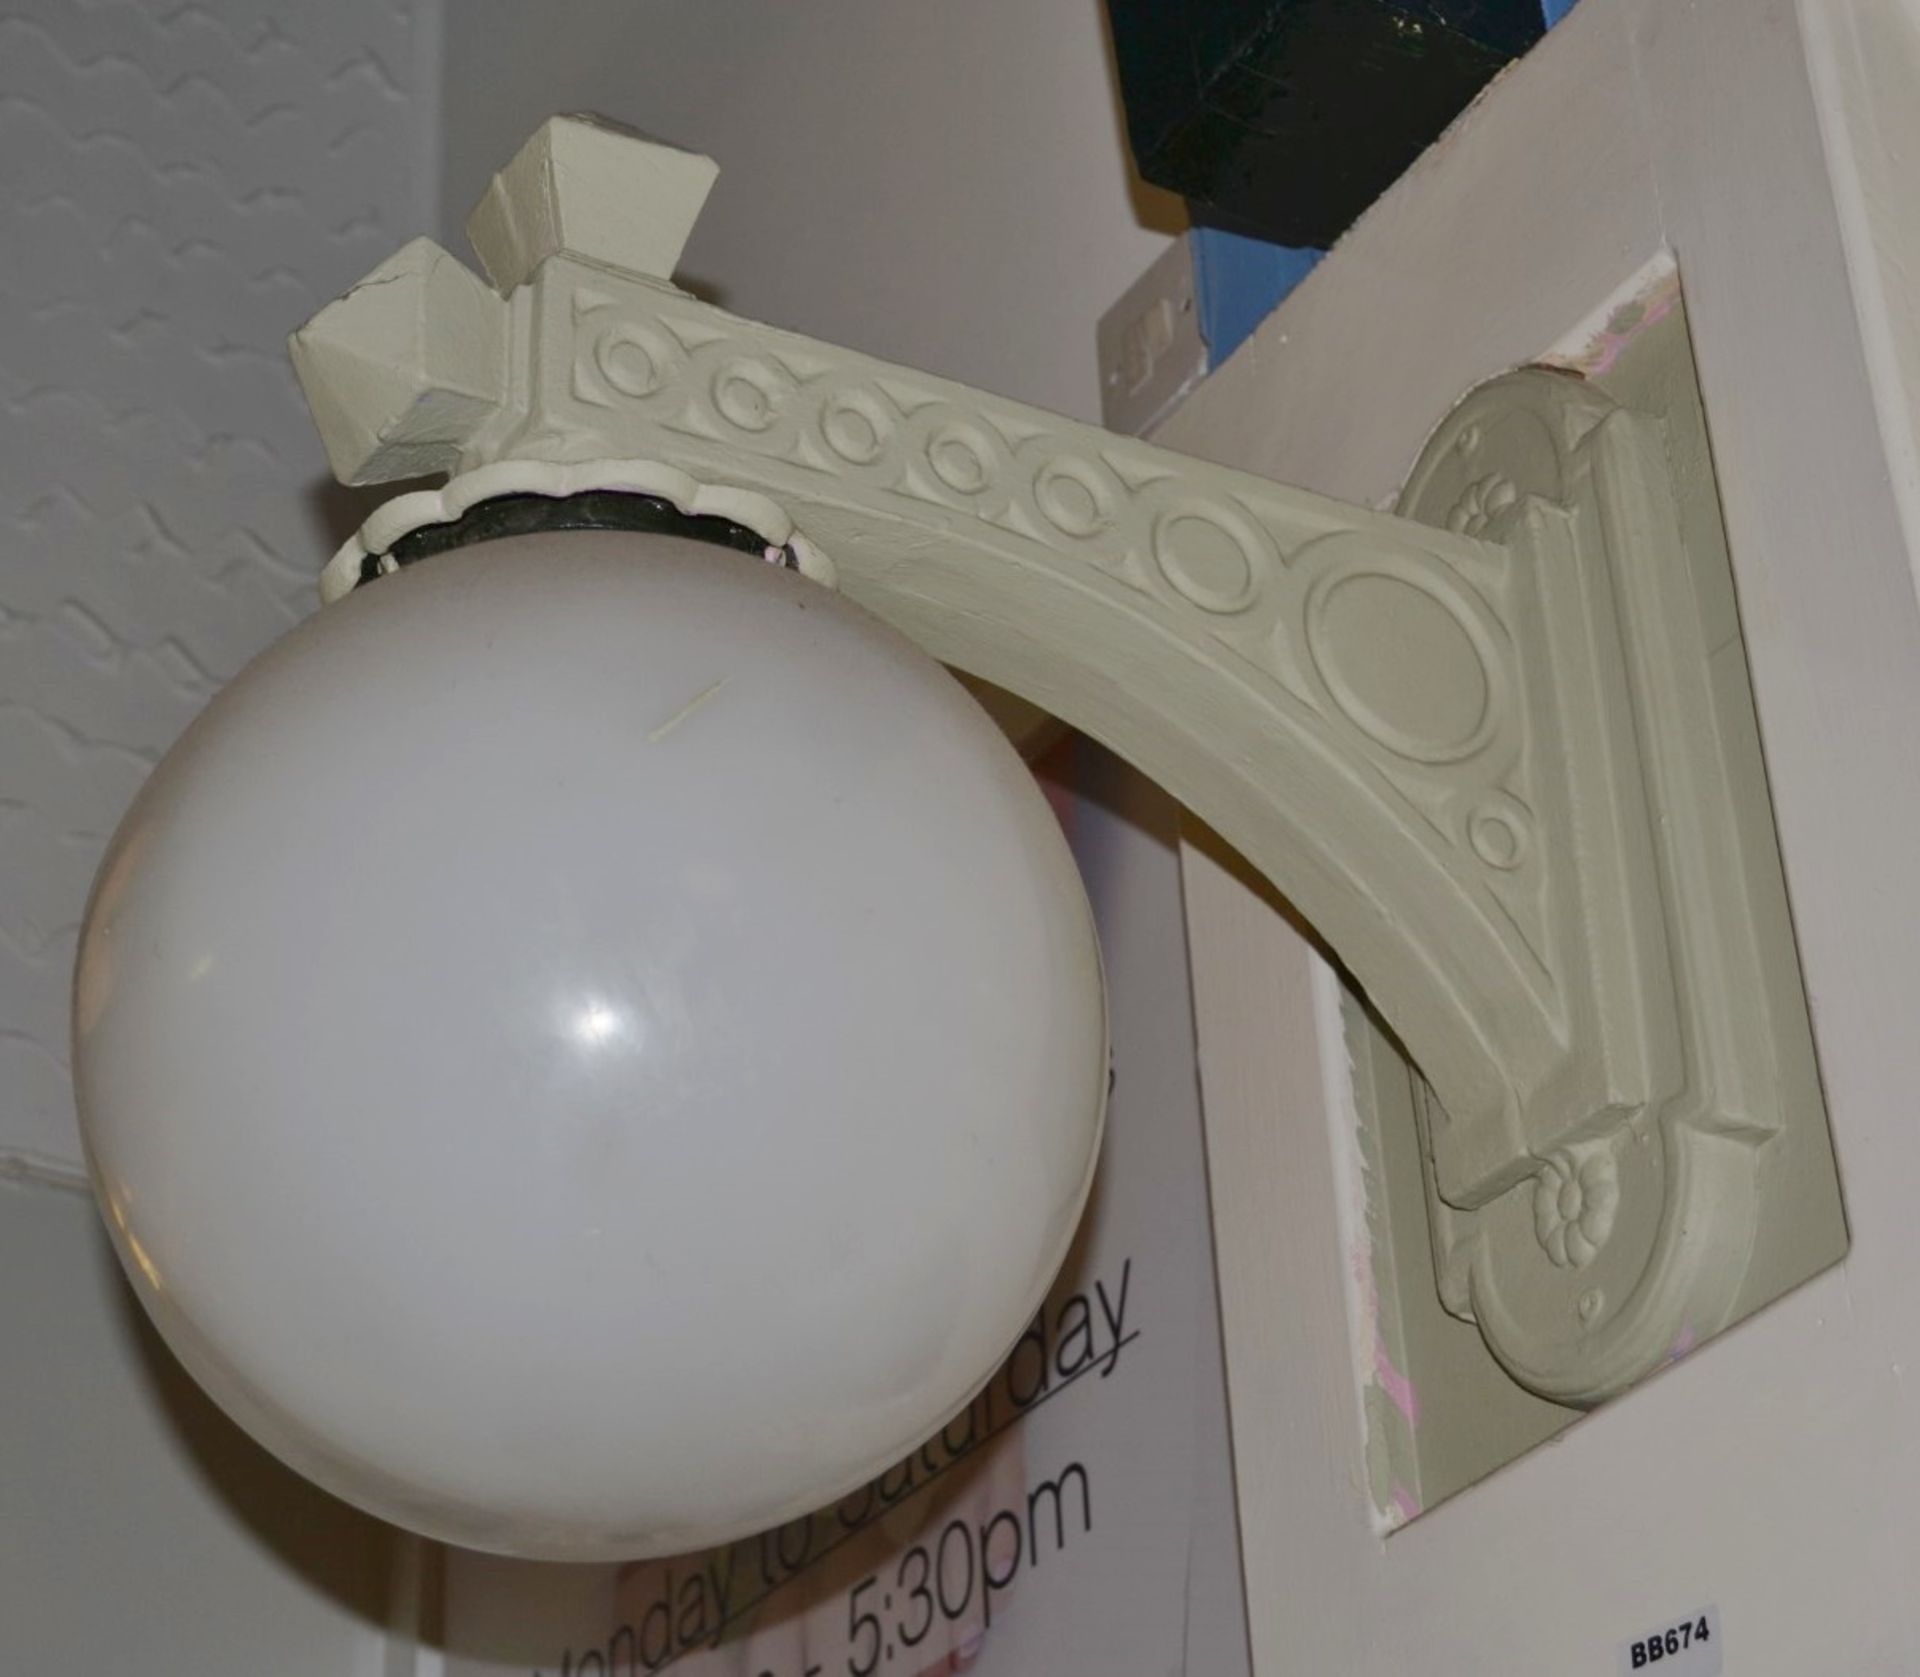 3 x Matching Wall Lights With Globe Shades - Dimensions: Production 53 cms x Globe Wdith 27 cms - - Image 2 of 3